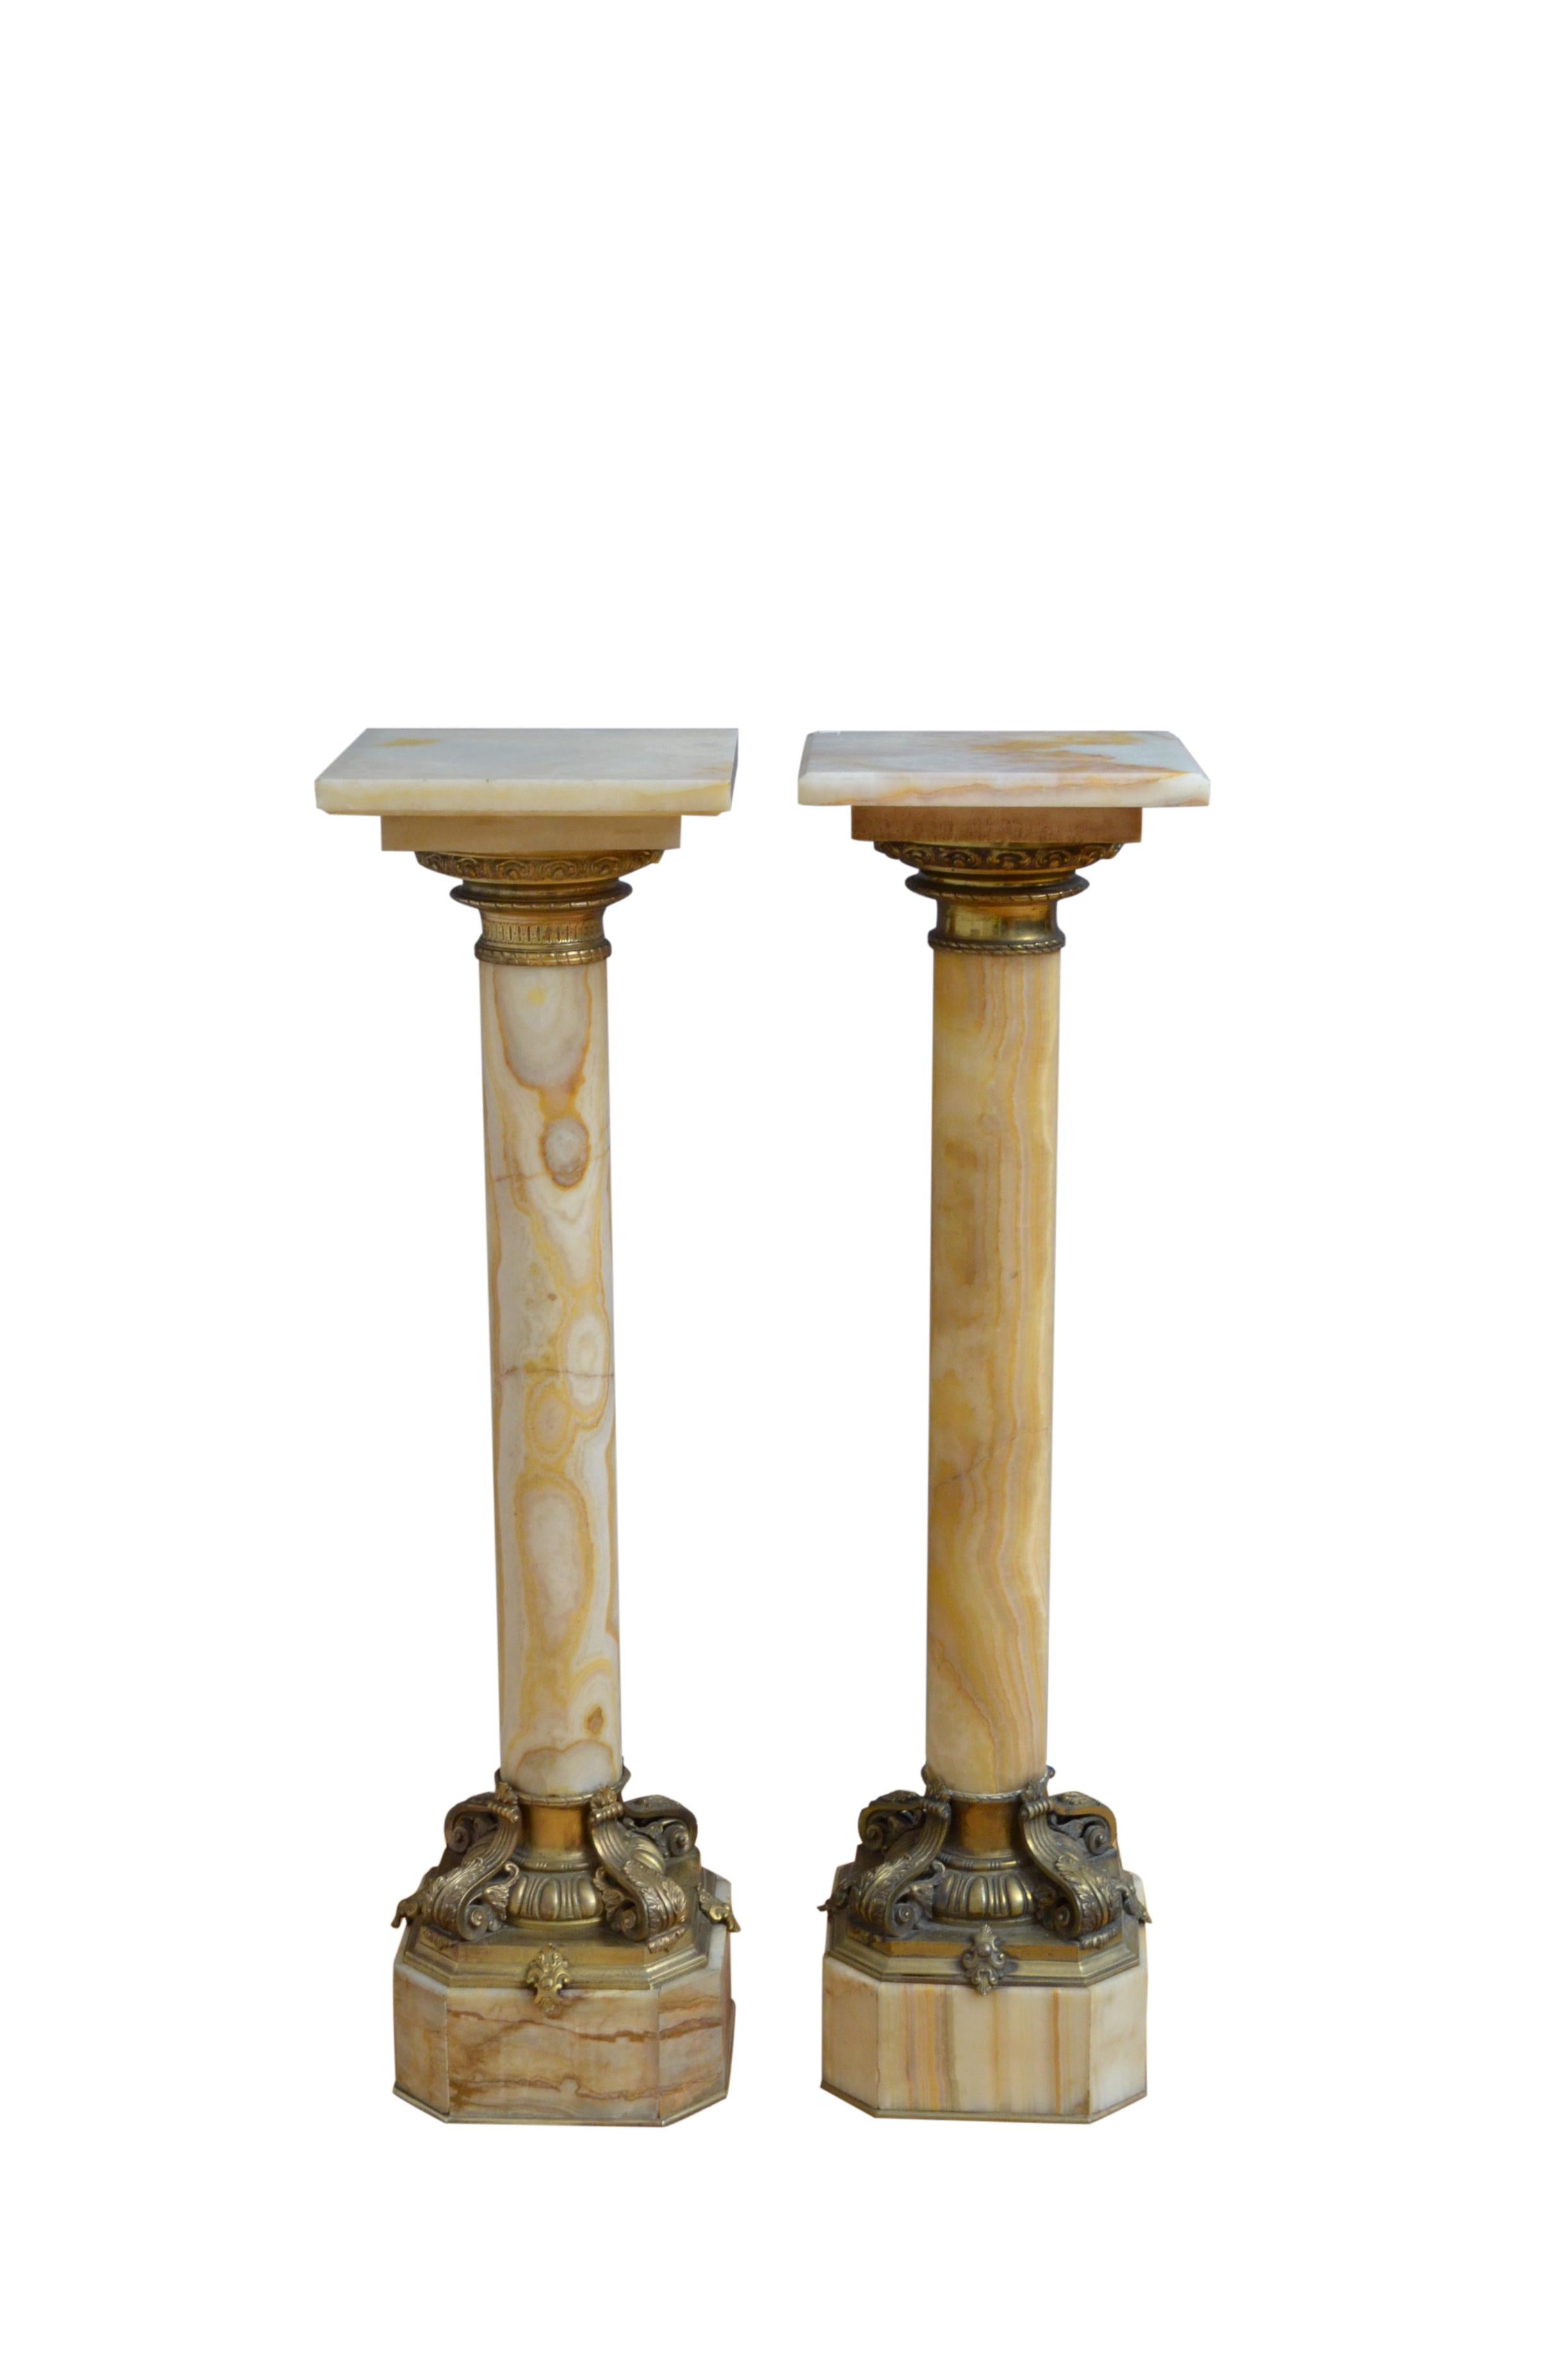 Matched pair of exquisite XIXth century onyx pedestals each with revolving top with ormolu collar below, substantial column with variety of colours terminating in most beautiful base with egg and dart decoration and four scrolled leaves, standing on